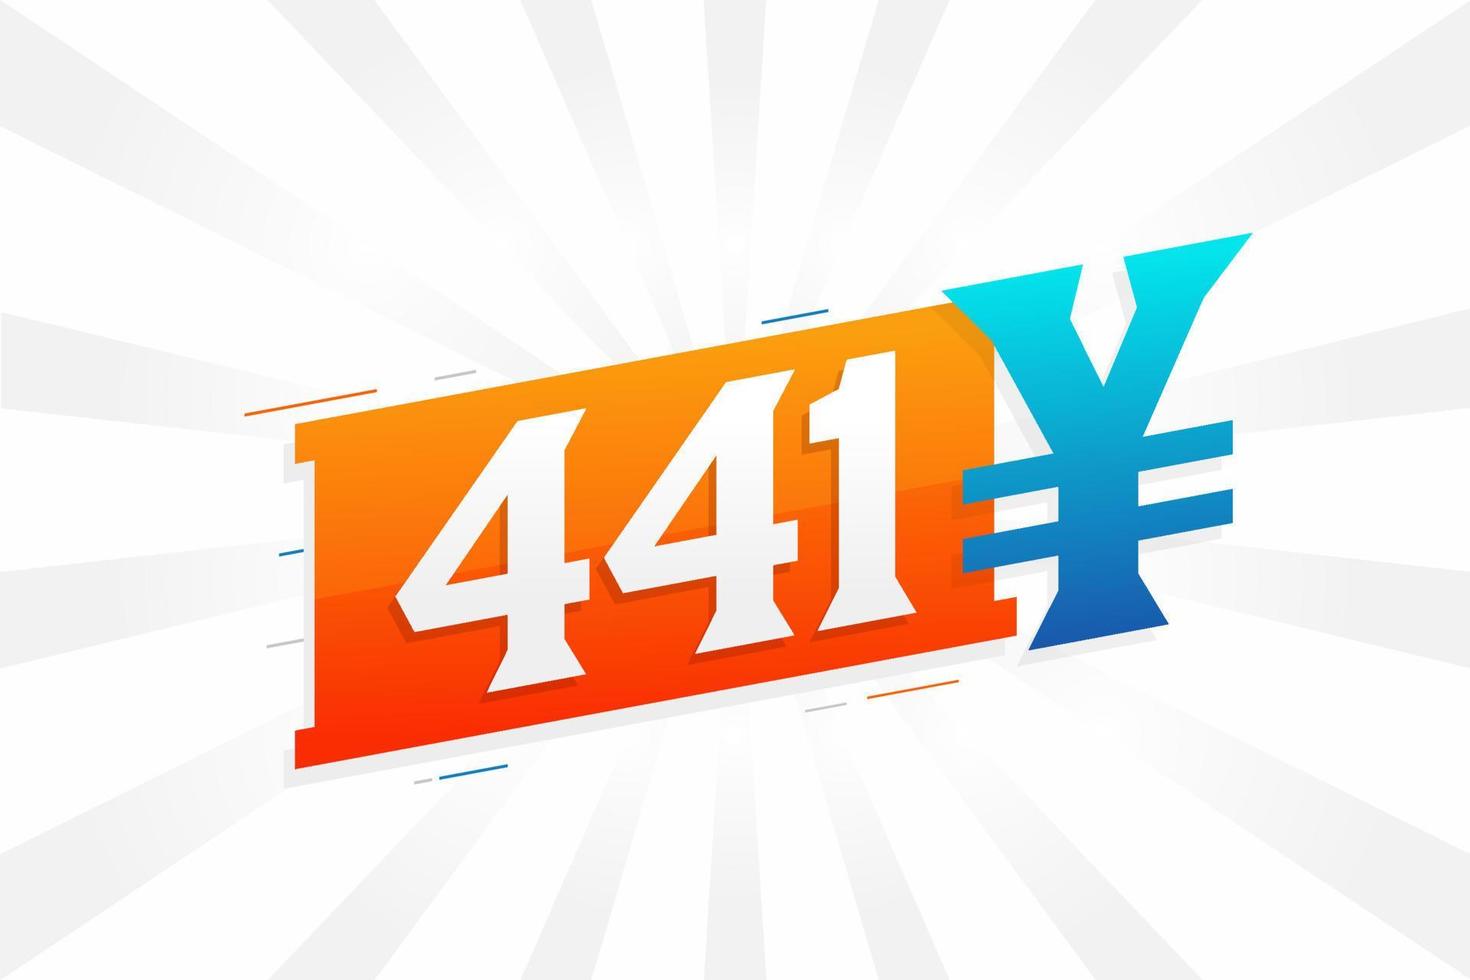 441 Yuan Chinese currency vector text symbol. 441 Yen Japanese currency Money stock vector